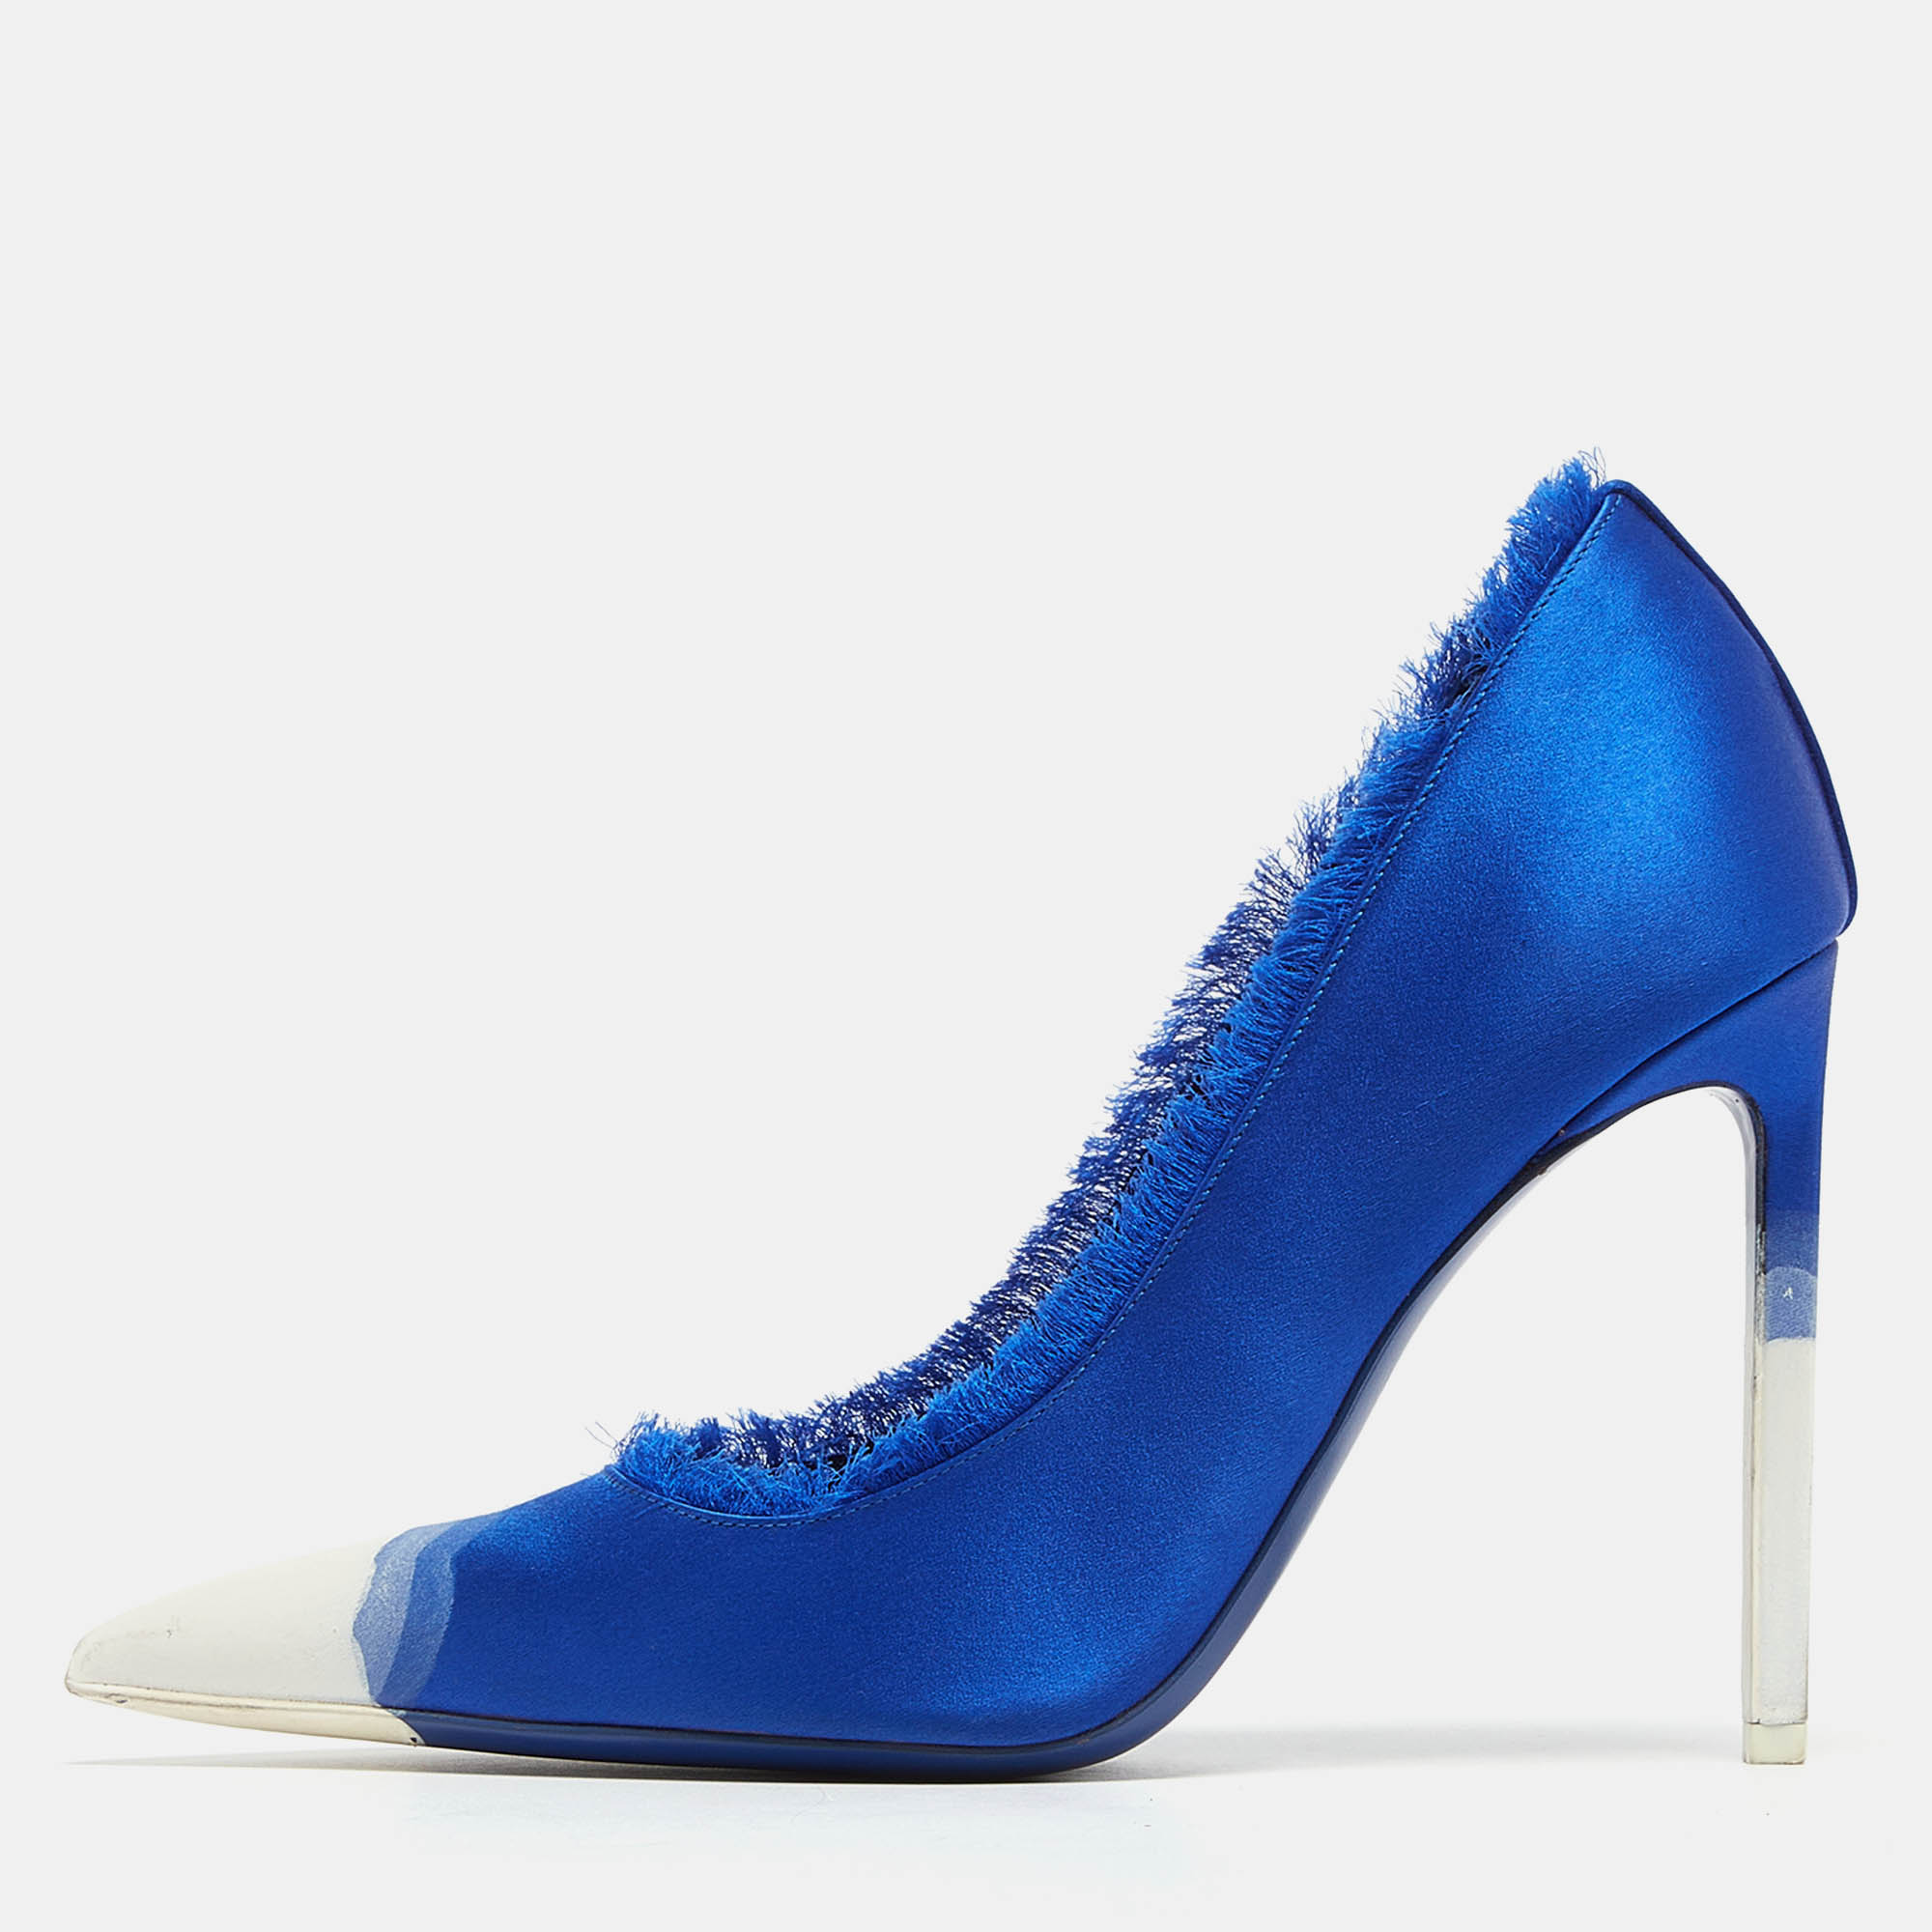 

Tom Ford Blue/White Fringed Satin Pointed Toe Pumps Size